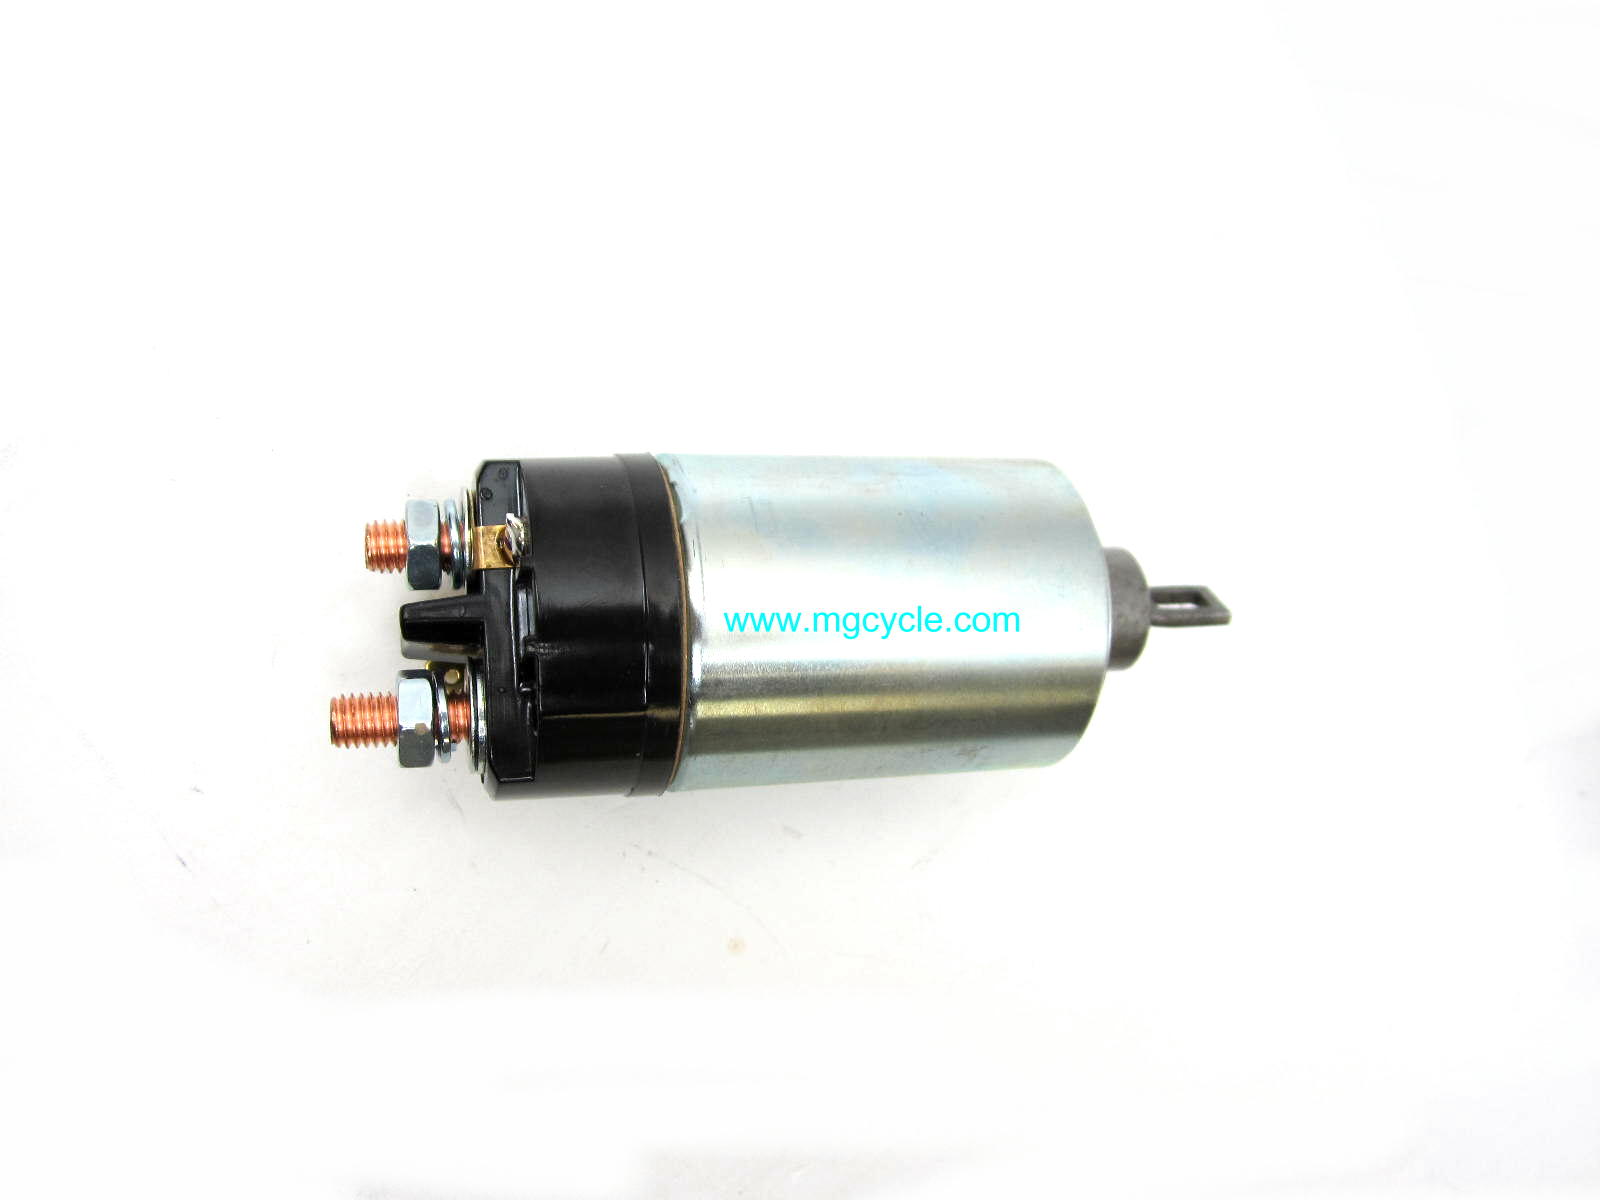 Starter solenoid for Bosch starters 1970's to early 90's